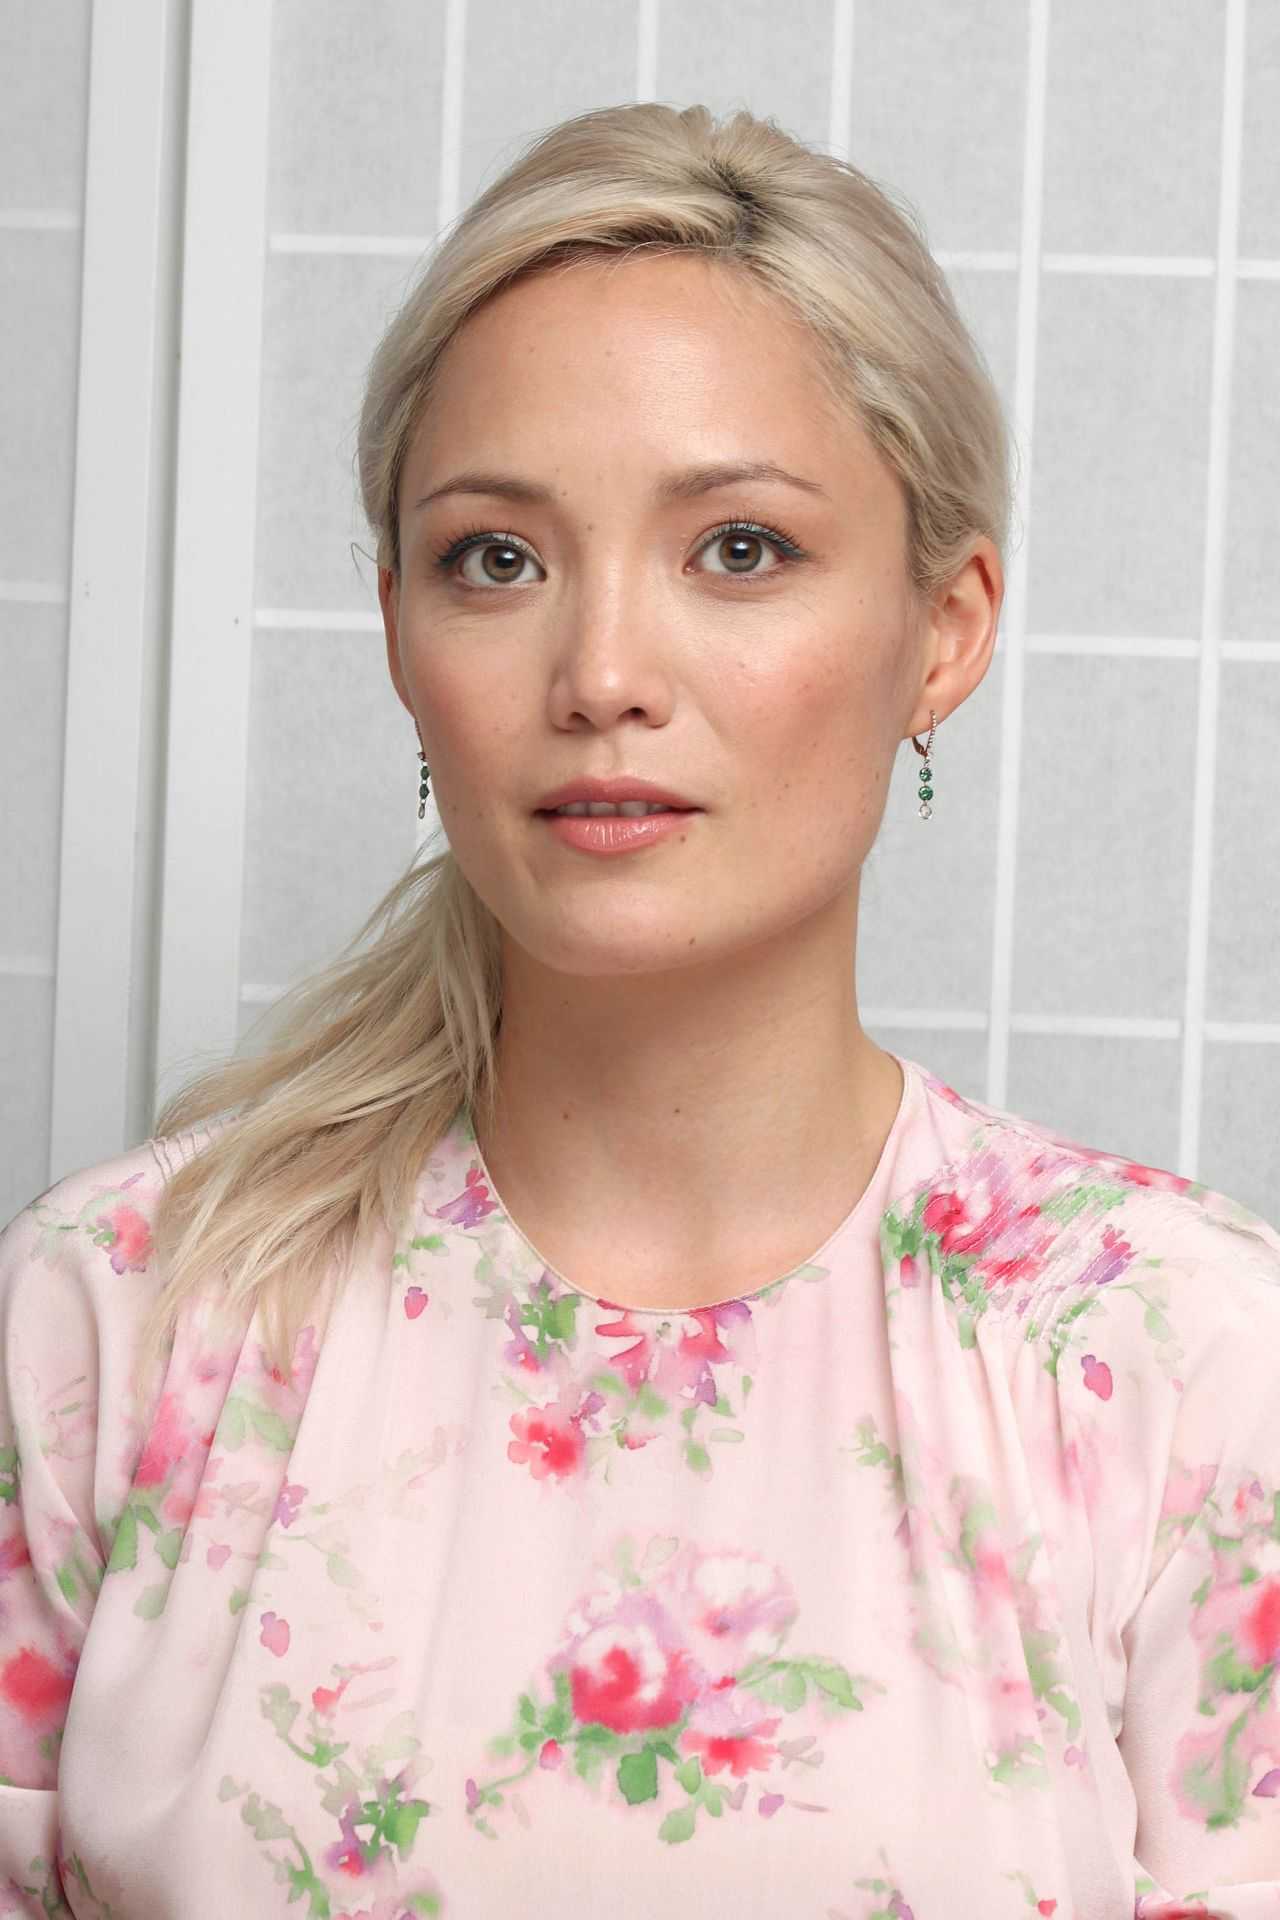 70+ Hot Pictures Of Pom Klementieff Who Plays Mantis In Marvel Cinematic Universe 111